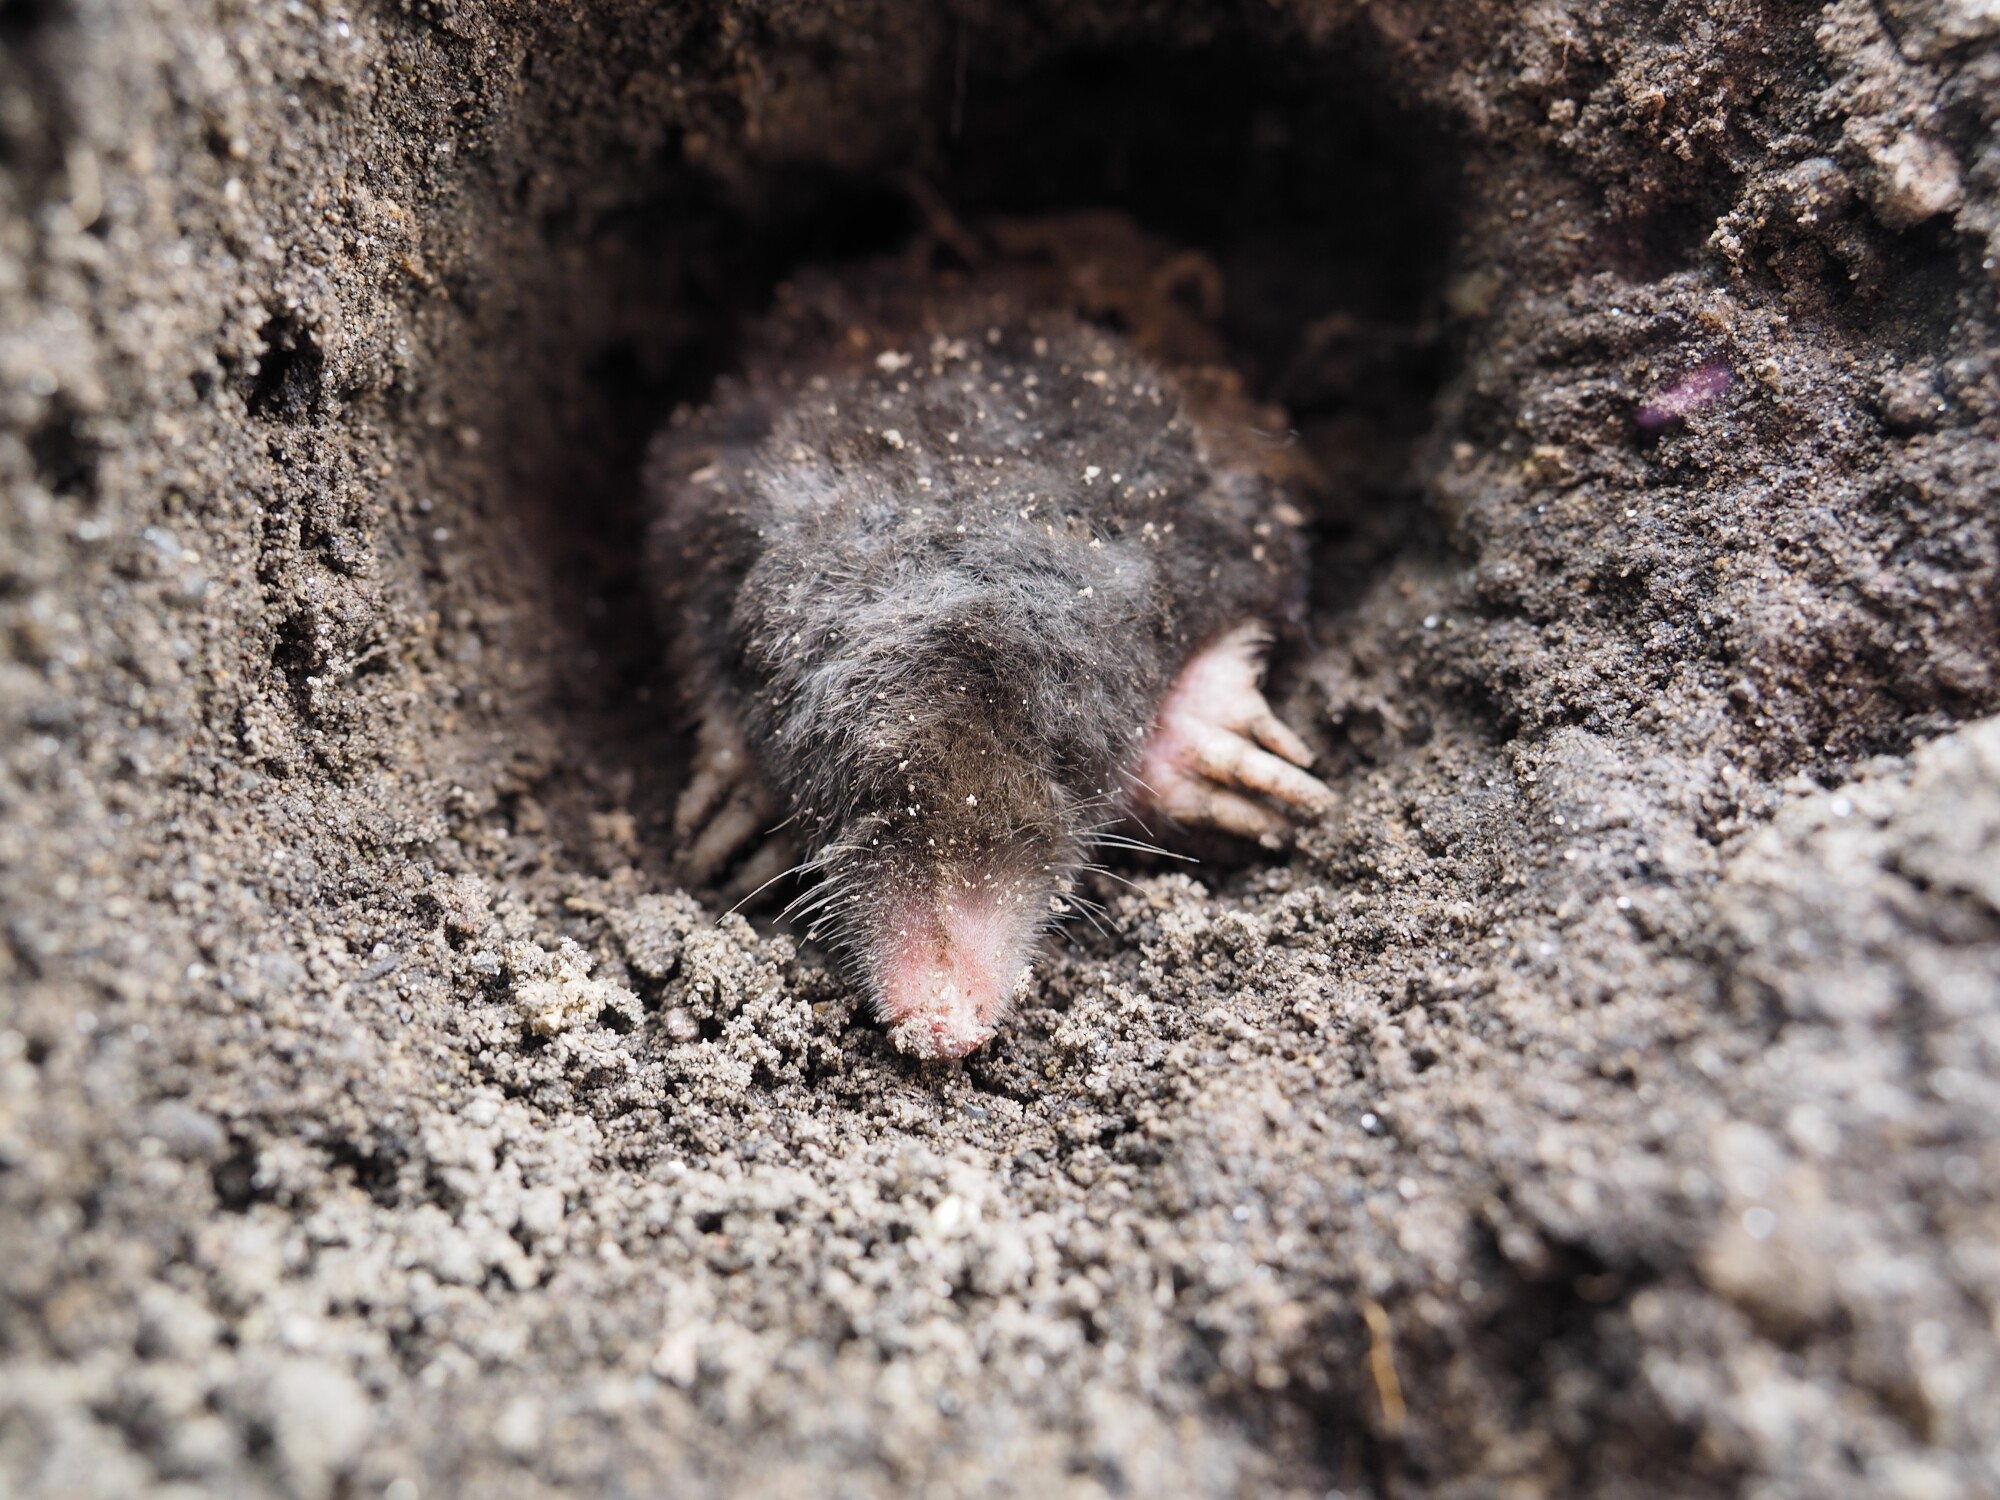 What Causes A Mole Infestation In House?